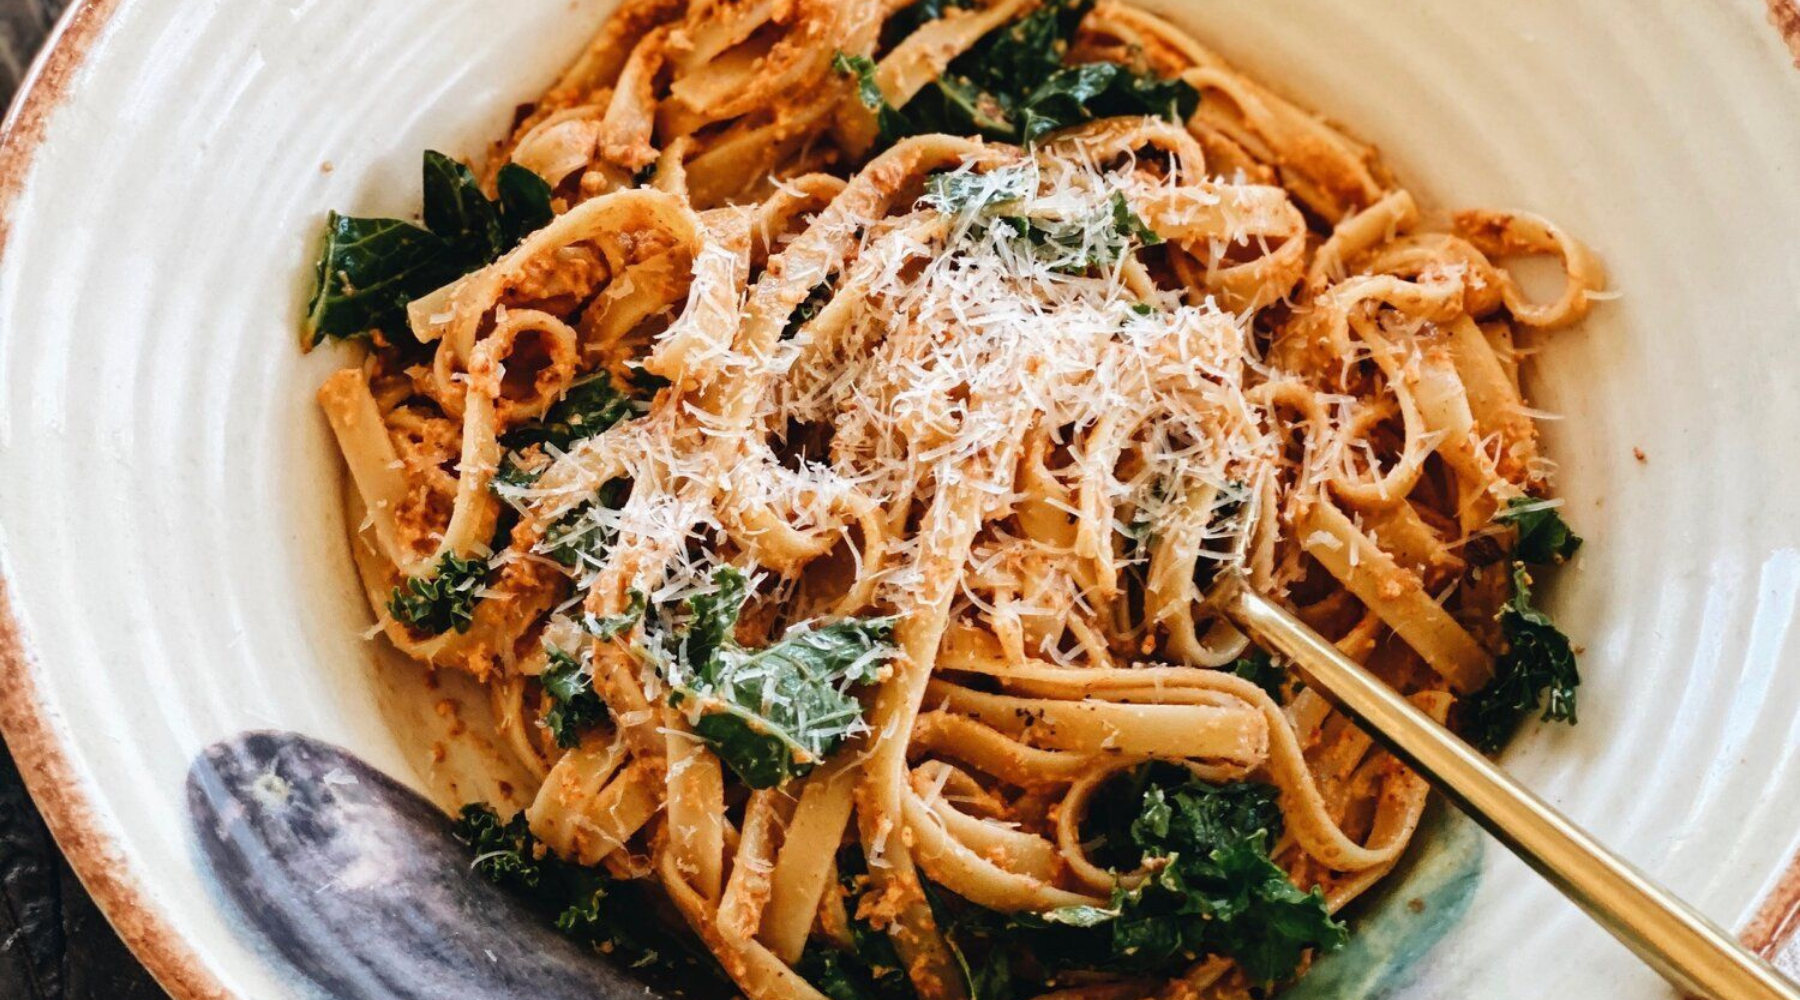 A mouth-watering fettuccini pasta with kale and romesco sauce